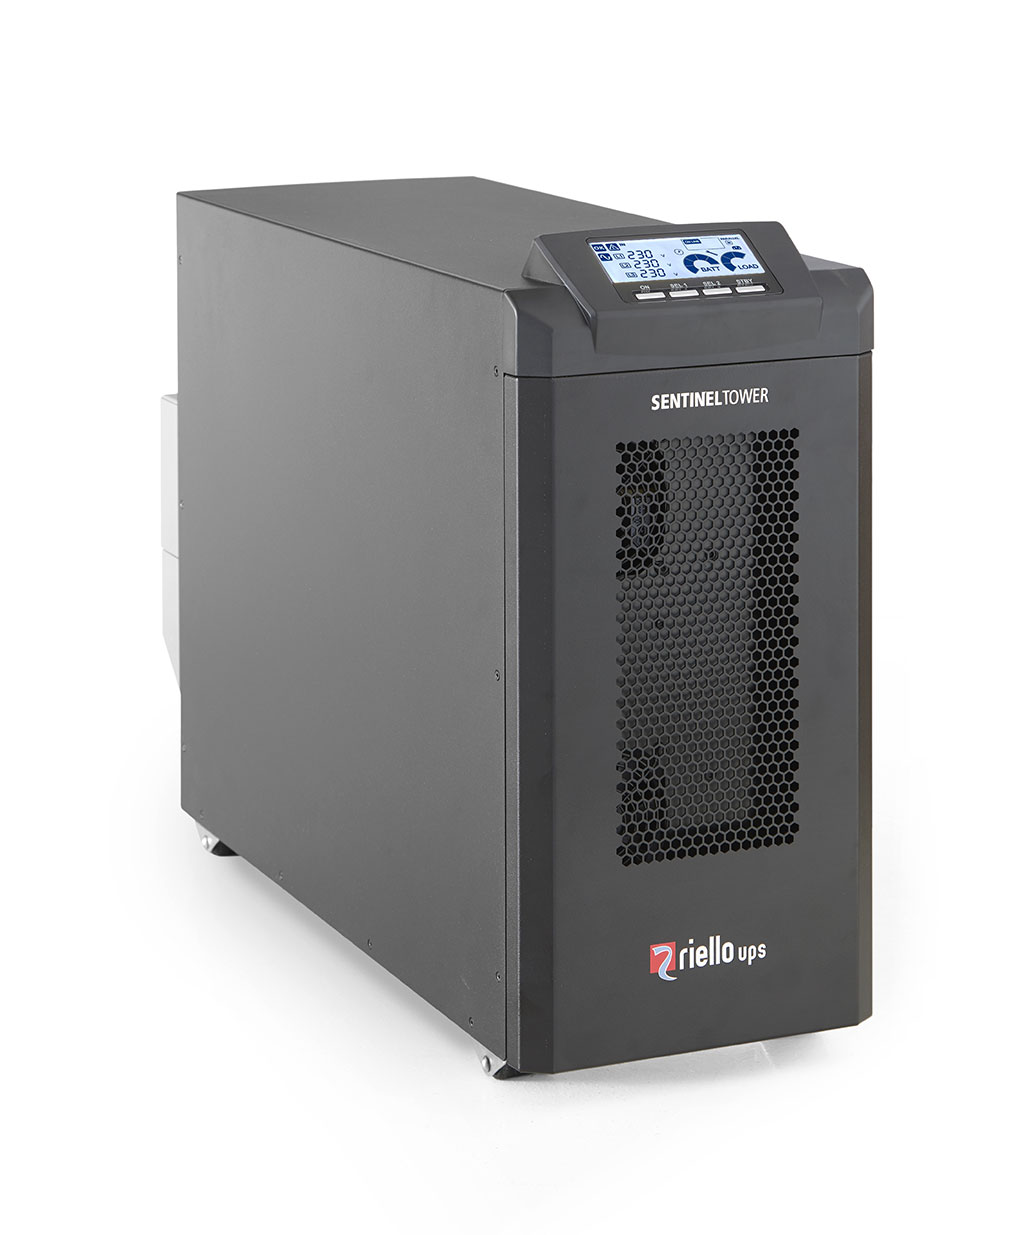 Riello STW 5000, Sentinel Tower, Online double conversion, 5 KVA 1/1, 3/1 400/230 Vac, 50Hz UPS system